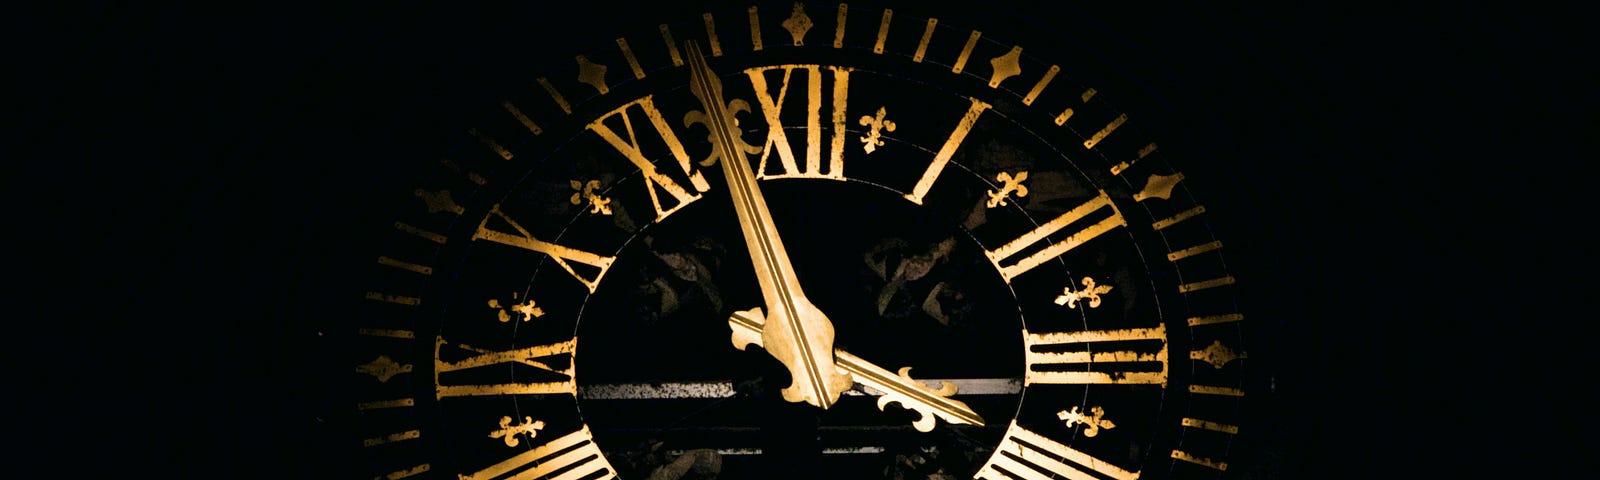 A gold clock face on a black background